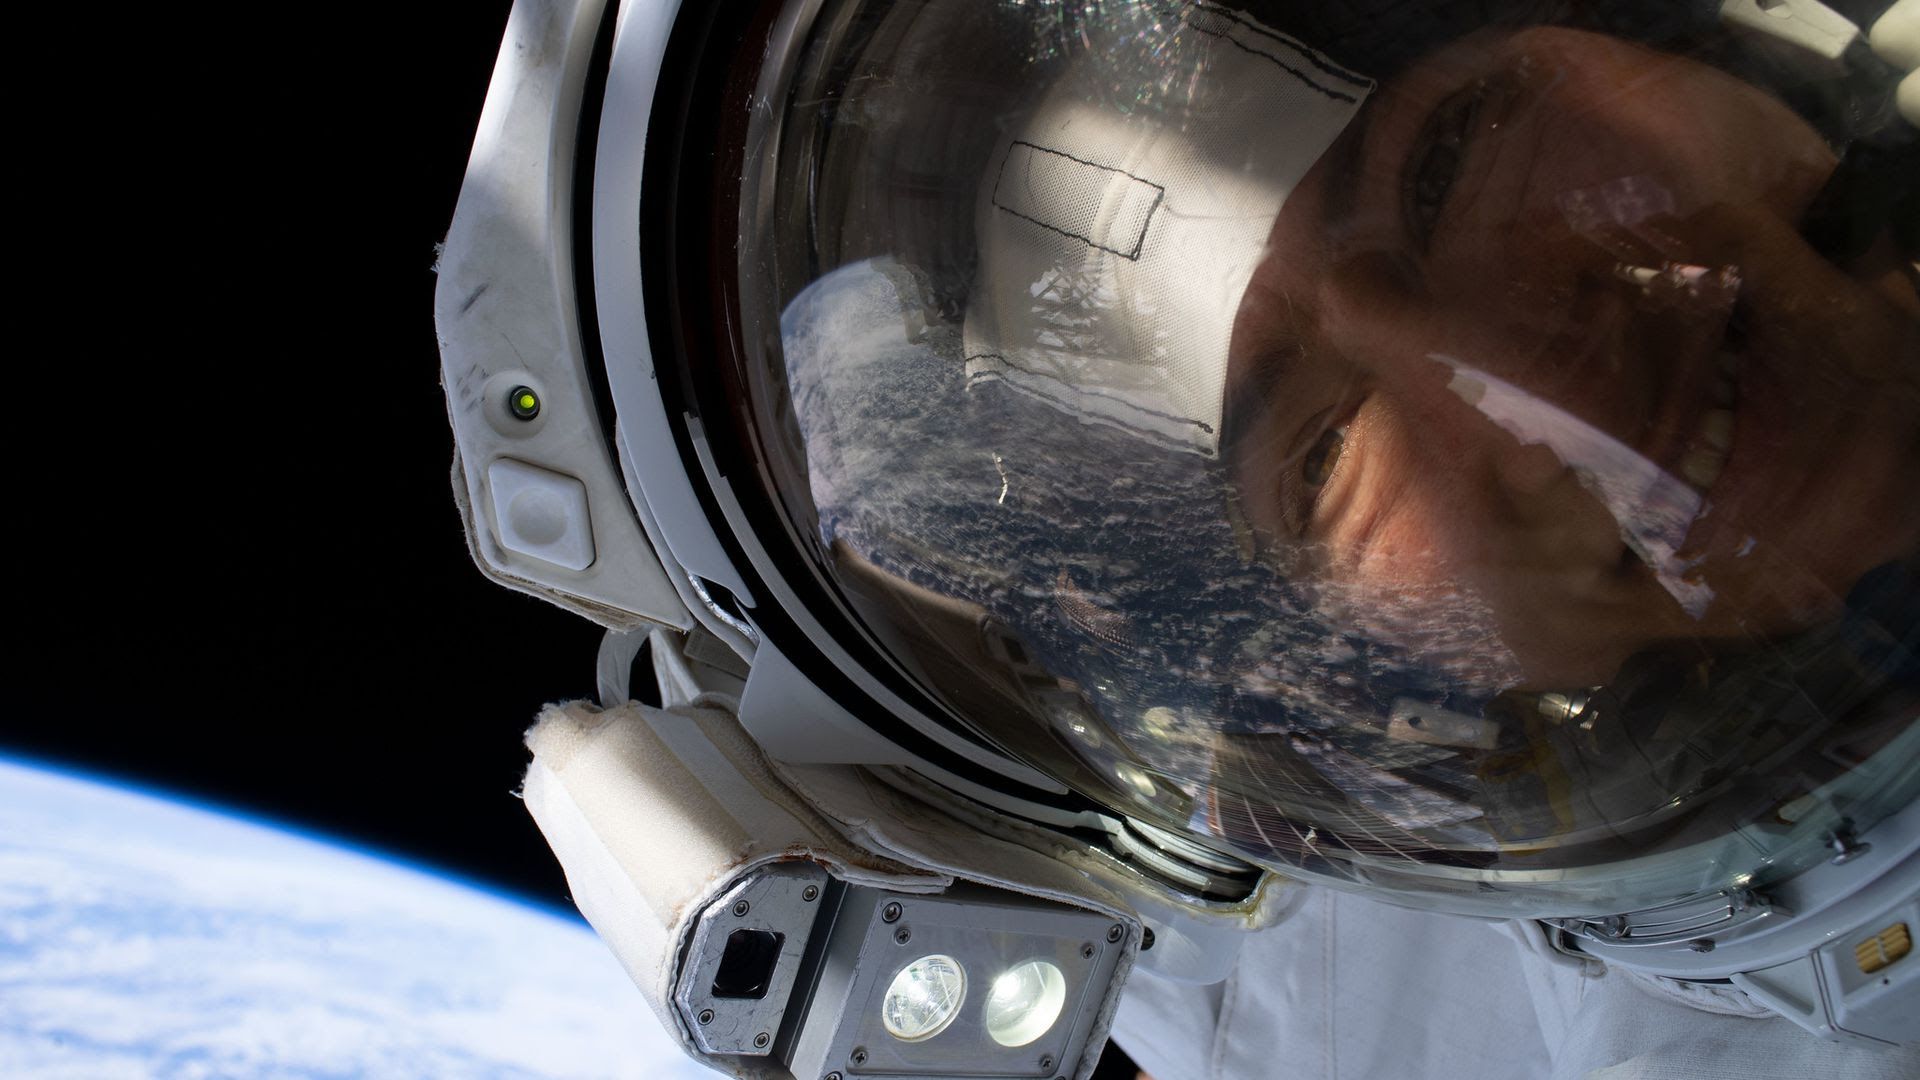 A female astronaut takes a selfie in outer space.